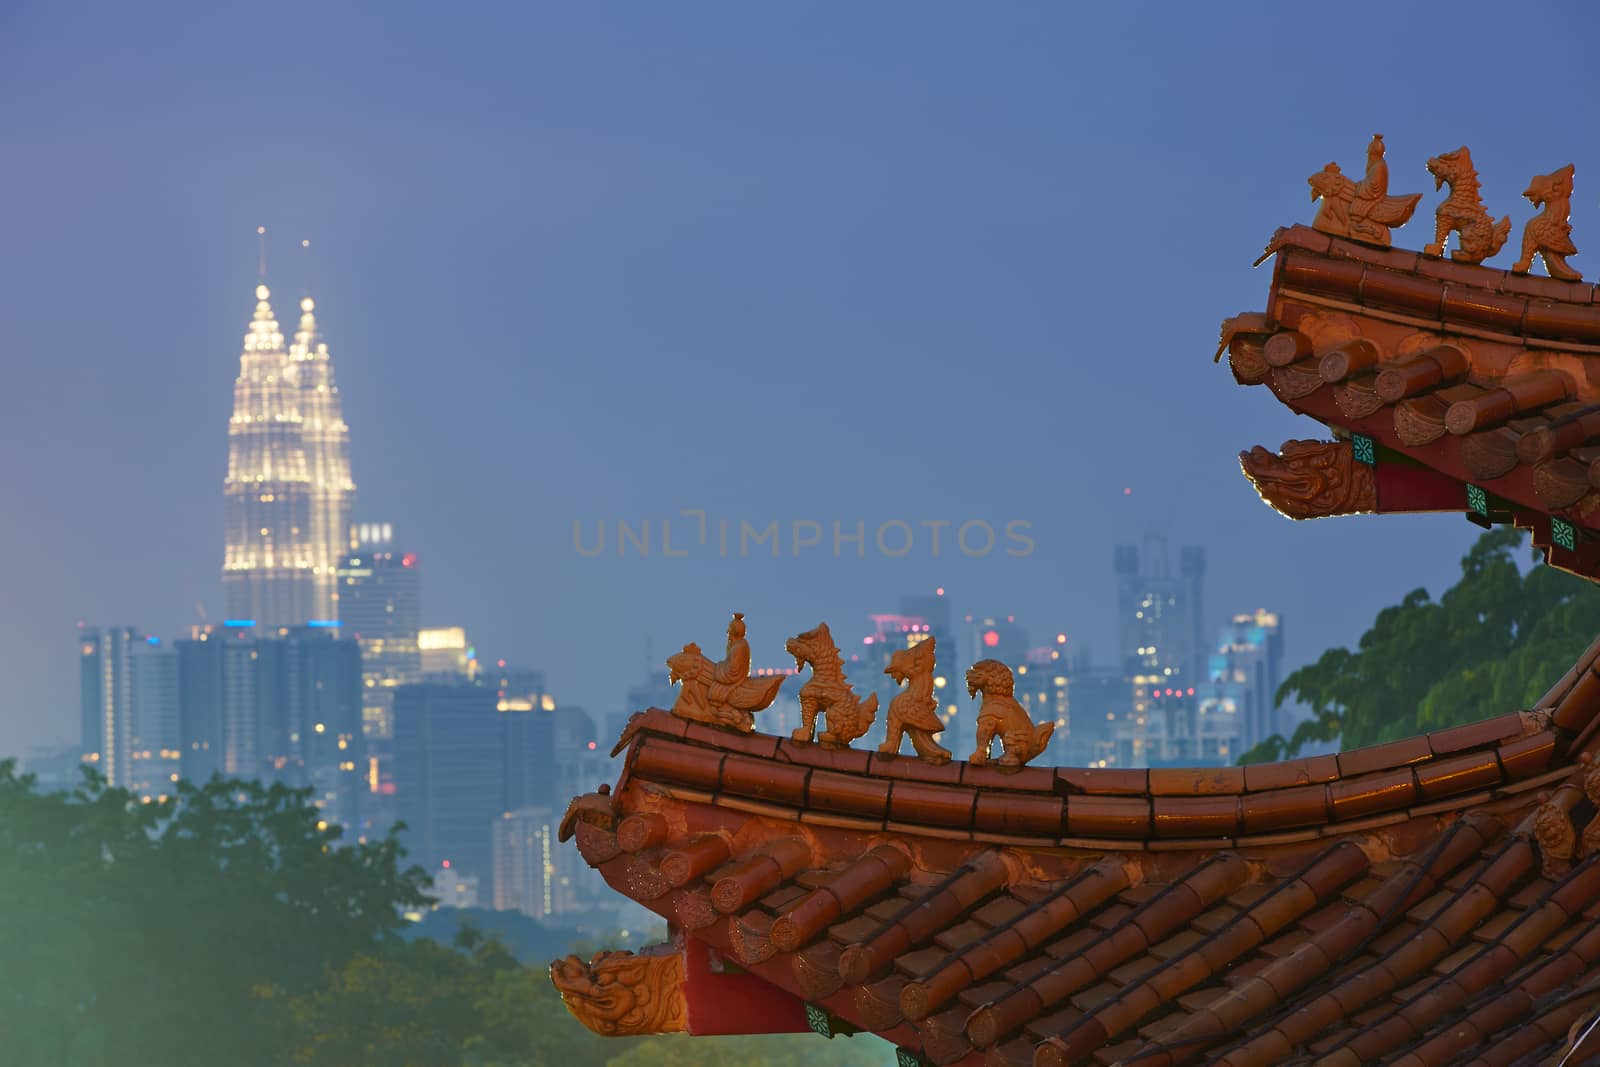 Roof of the chinese temple overlooking Petronas twin towers in Kuala Lumpur.